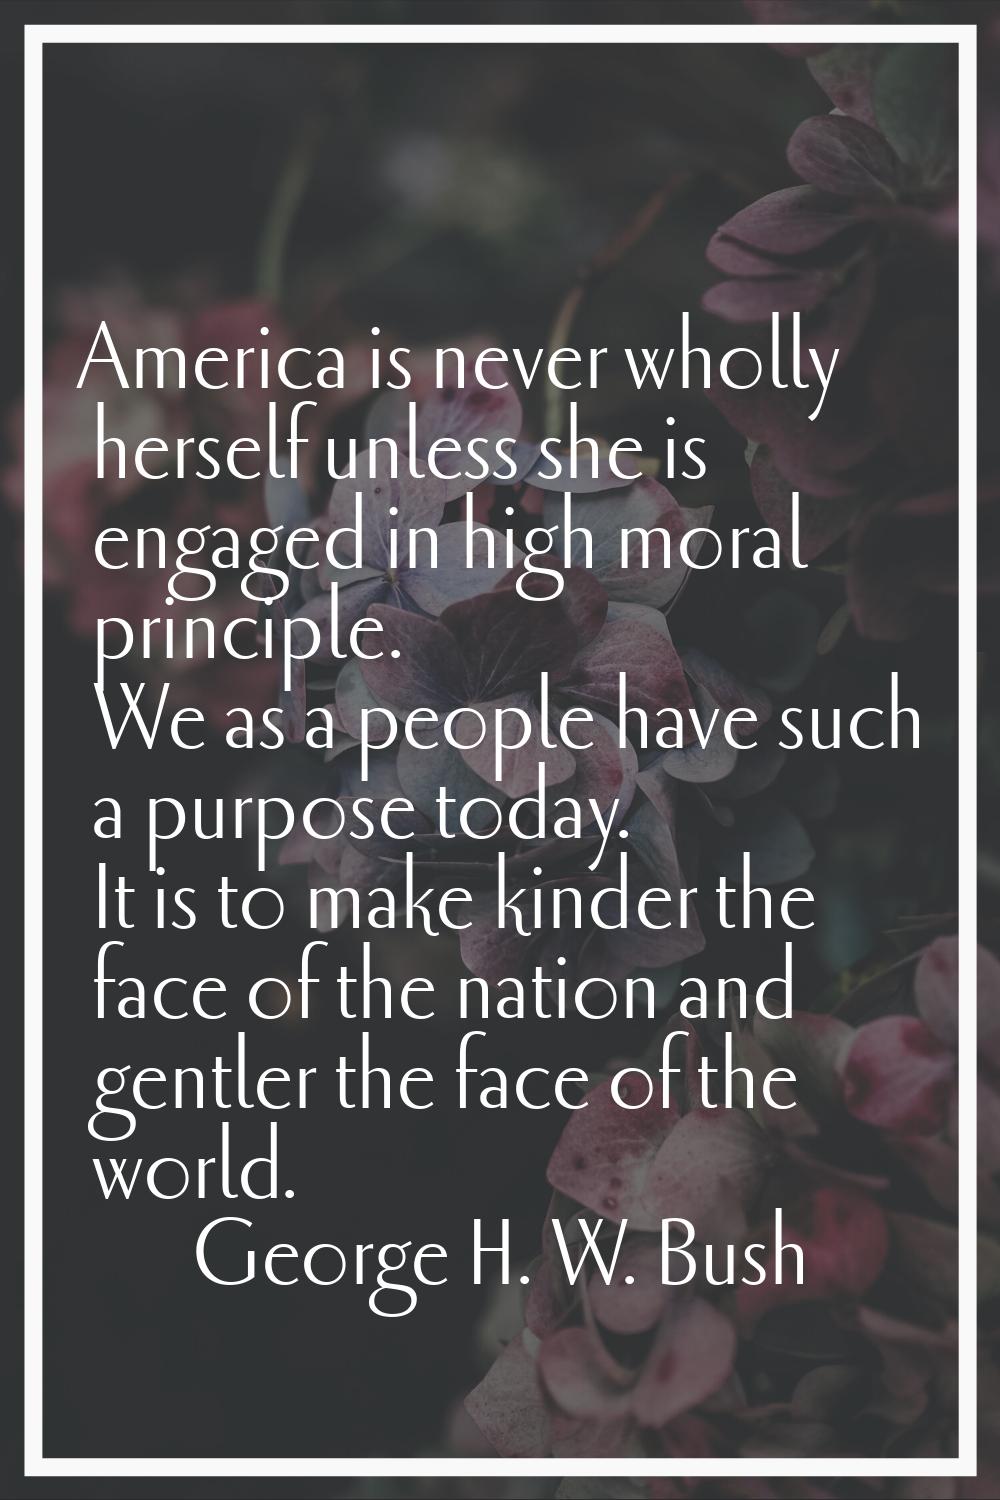 America is never wholly herself unless she is engaged in high moral principle. We as a people have 